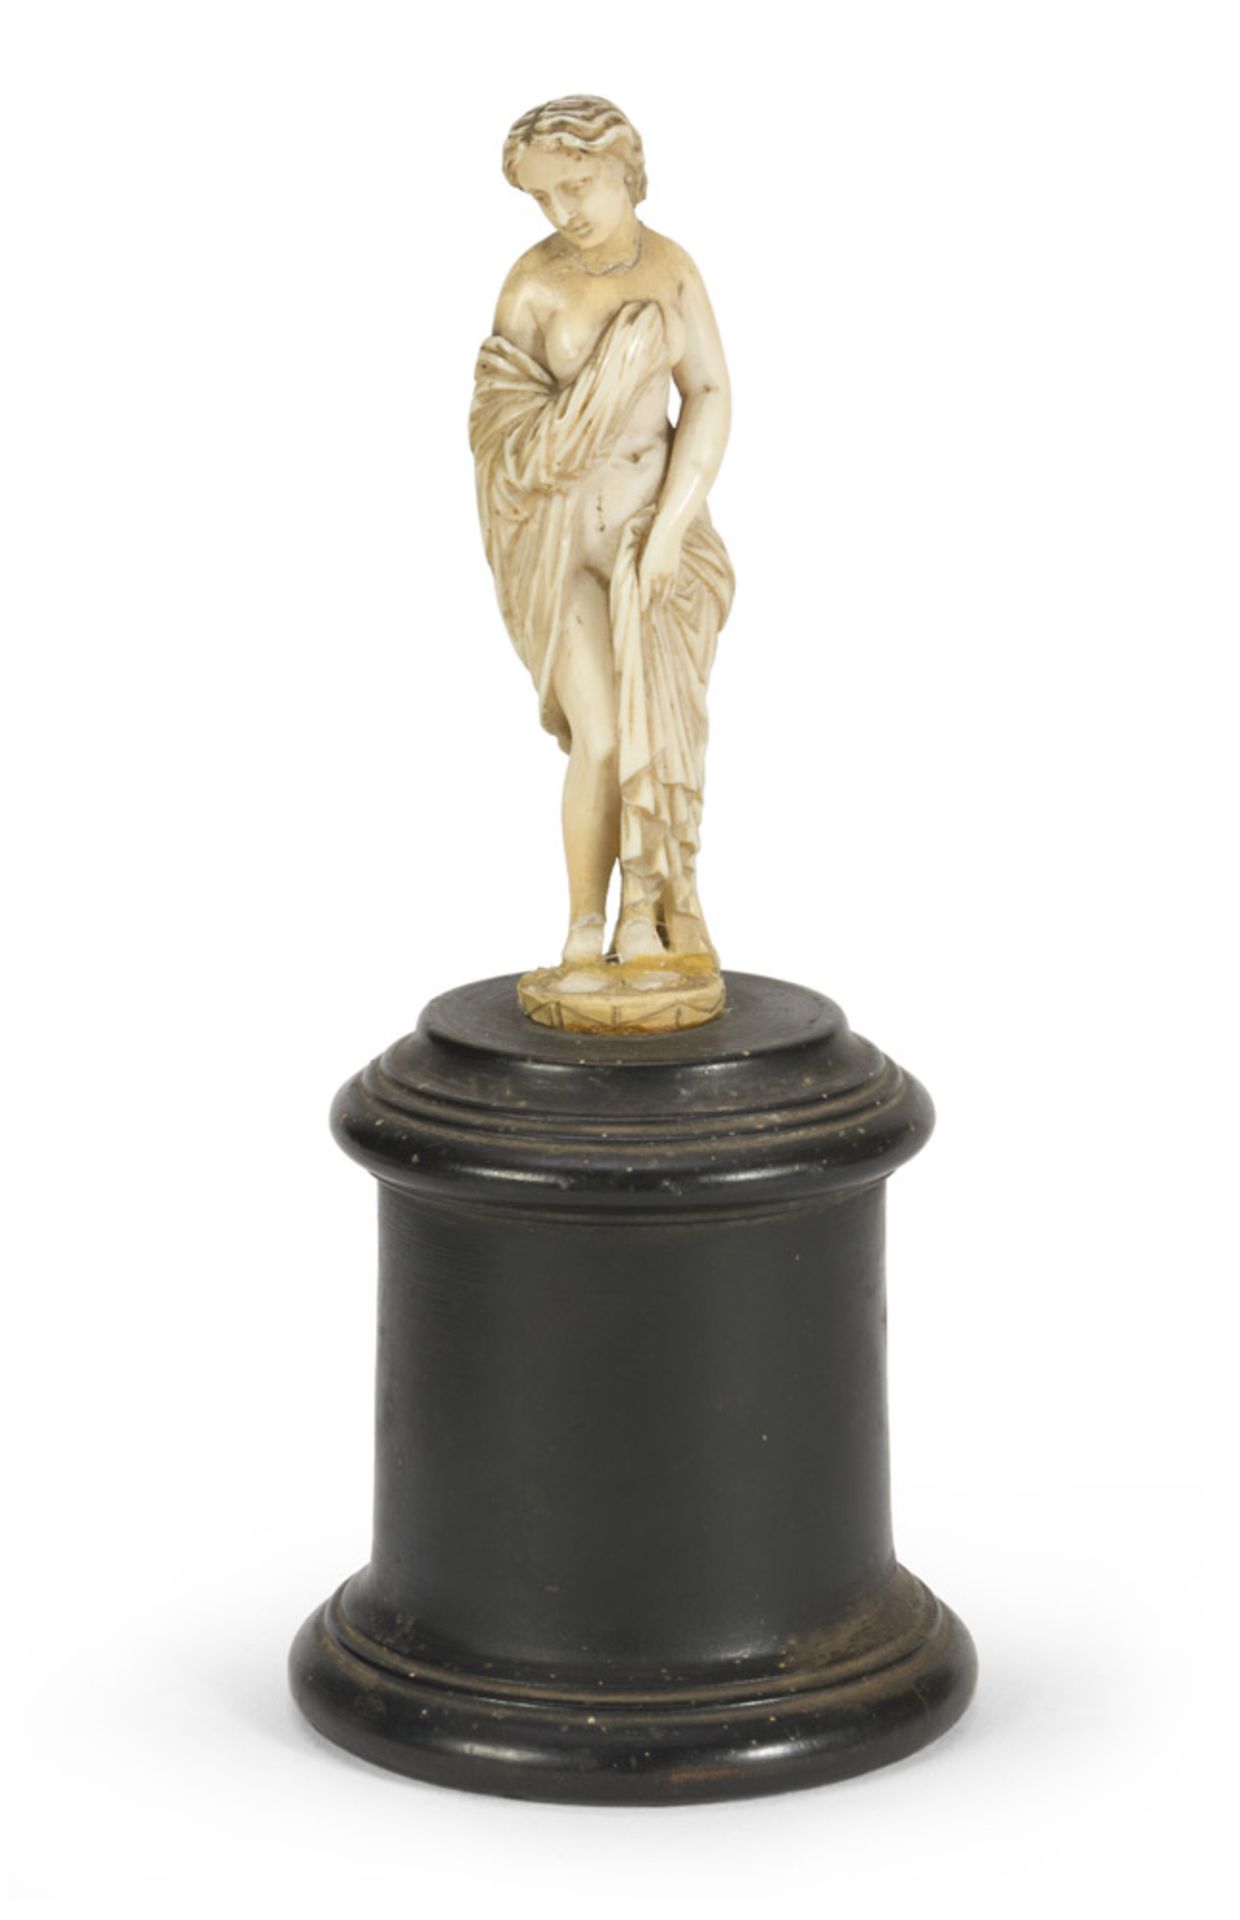 SMALL IVORY SCULPTURE – LATE 18TH CENTURY